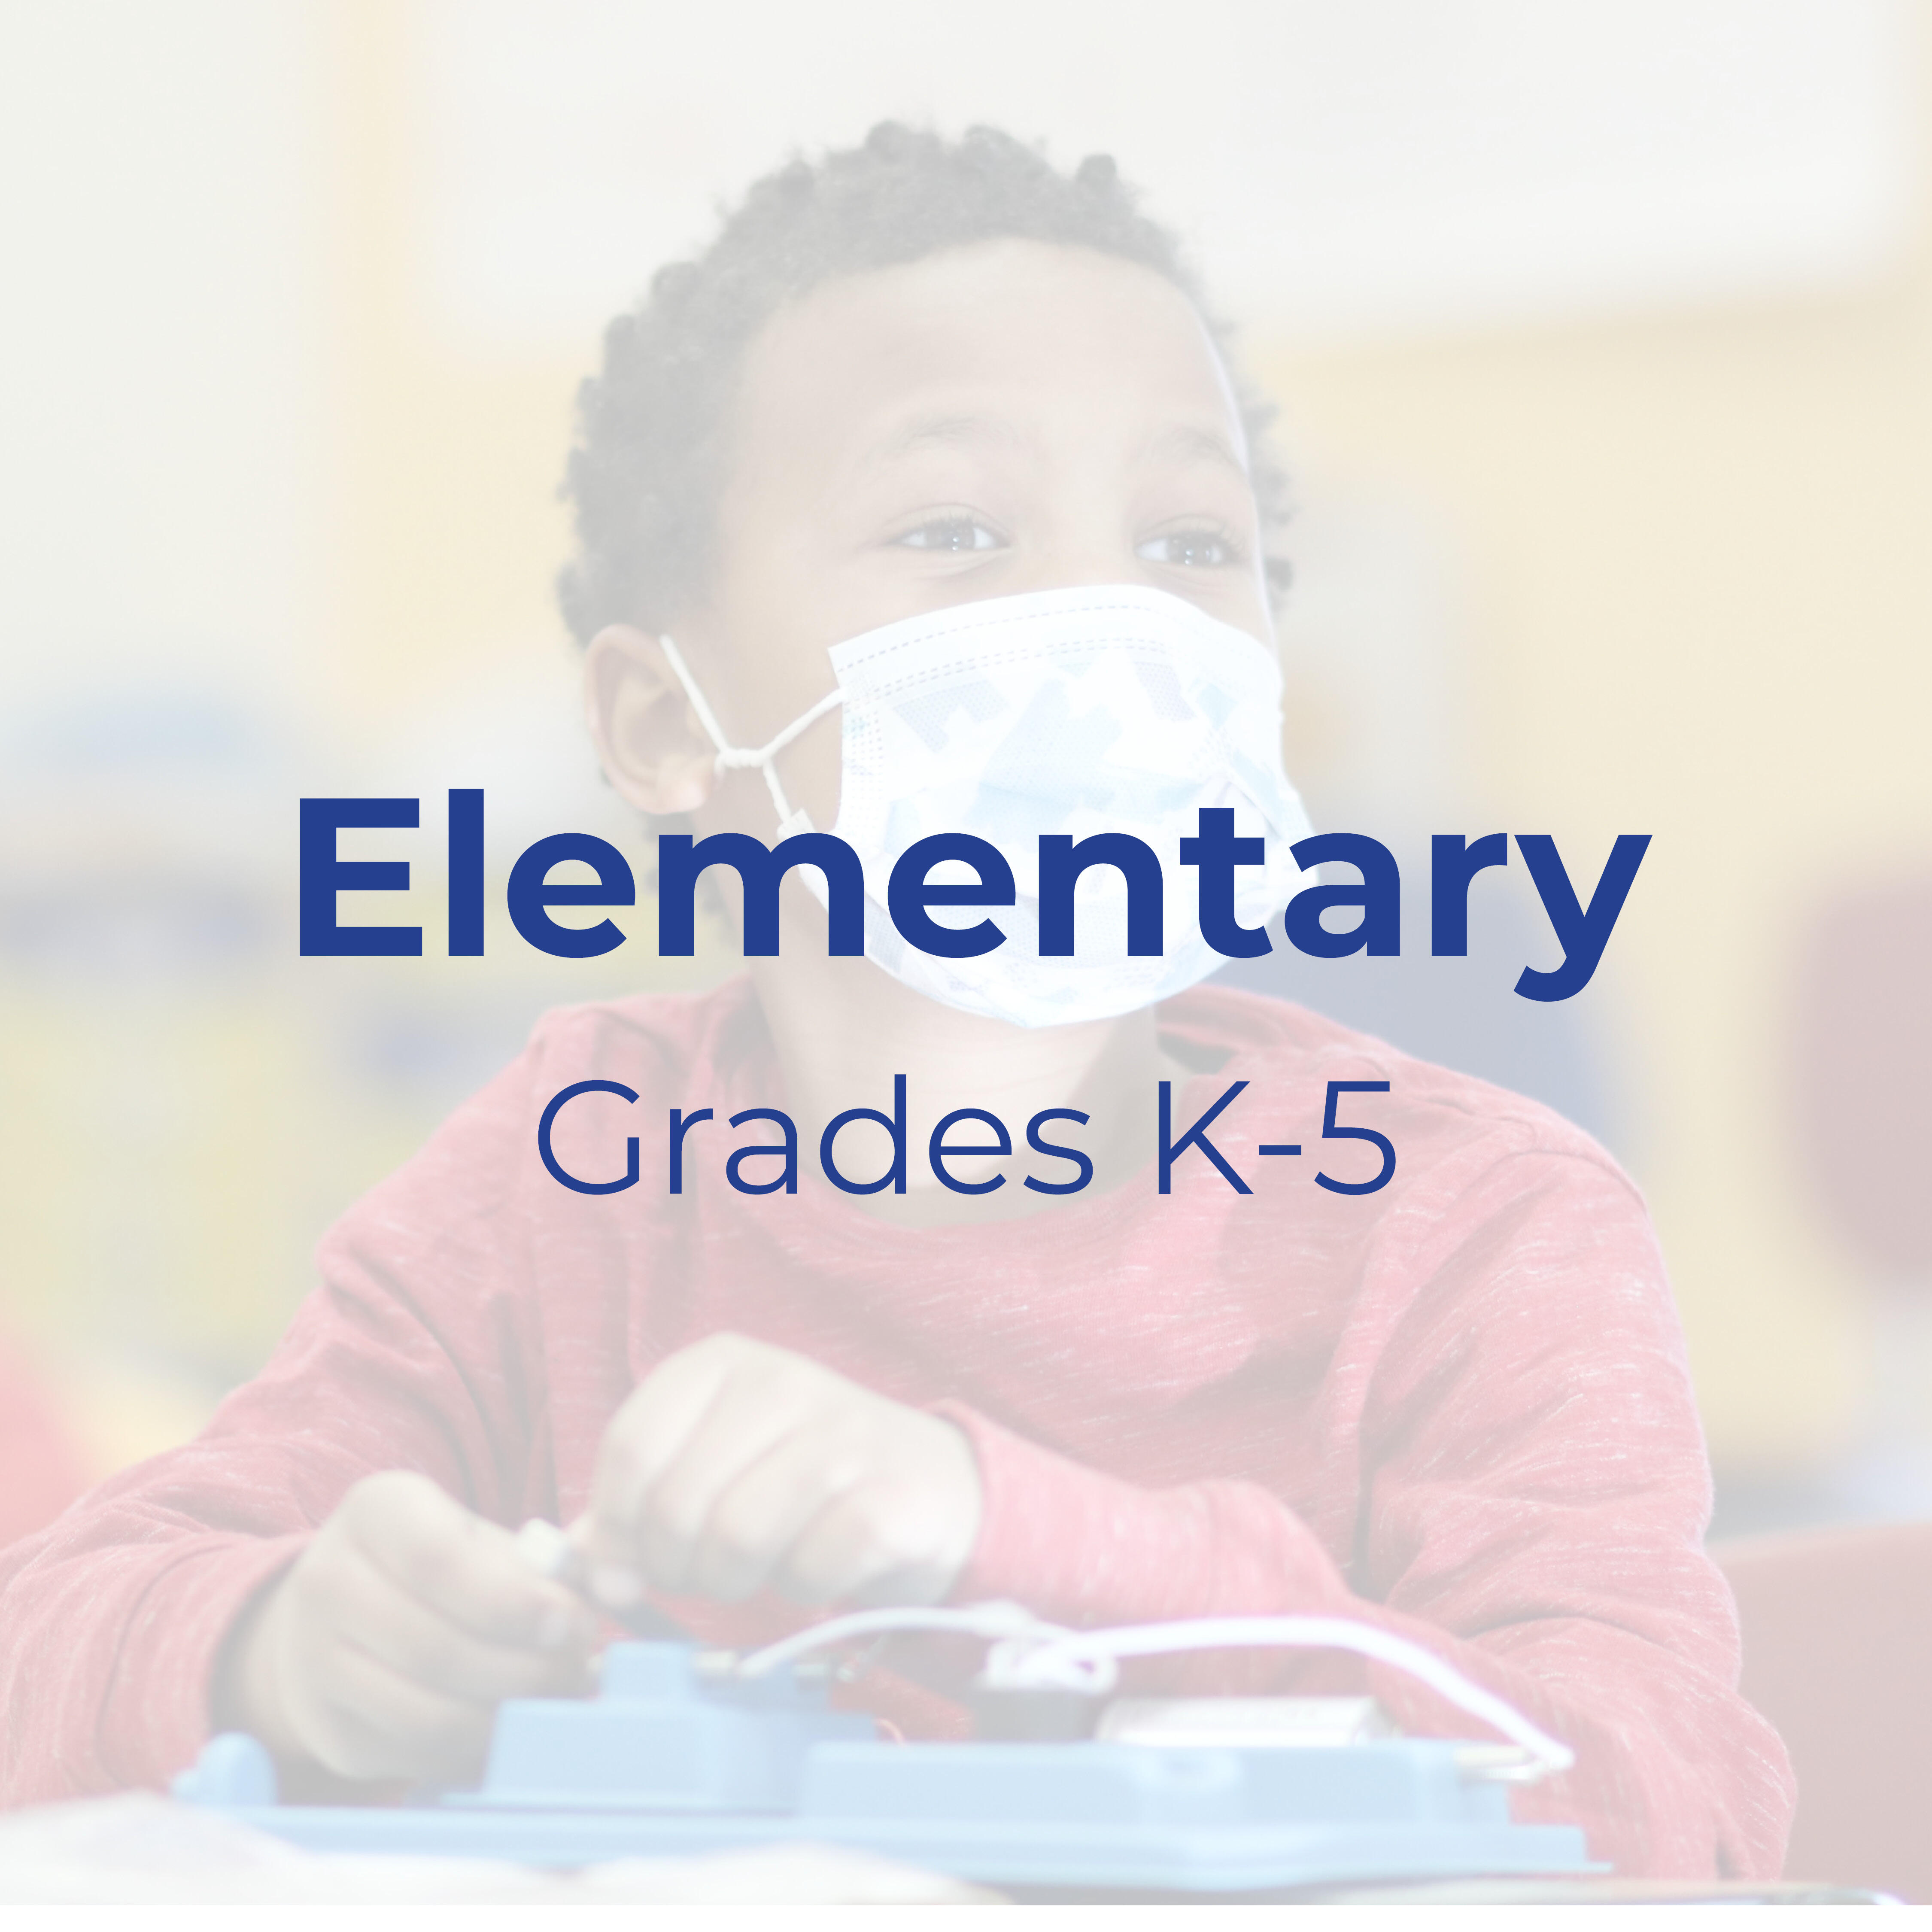 Text that reads "Elementary: Grades K-5" overlaid on a picture of a student.